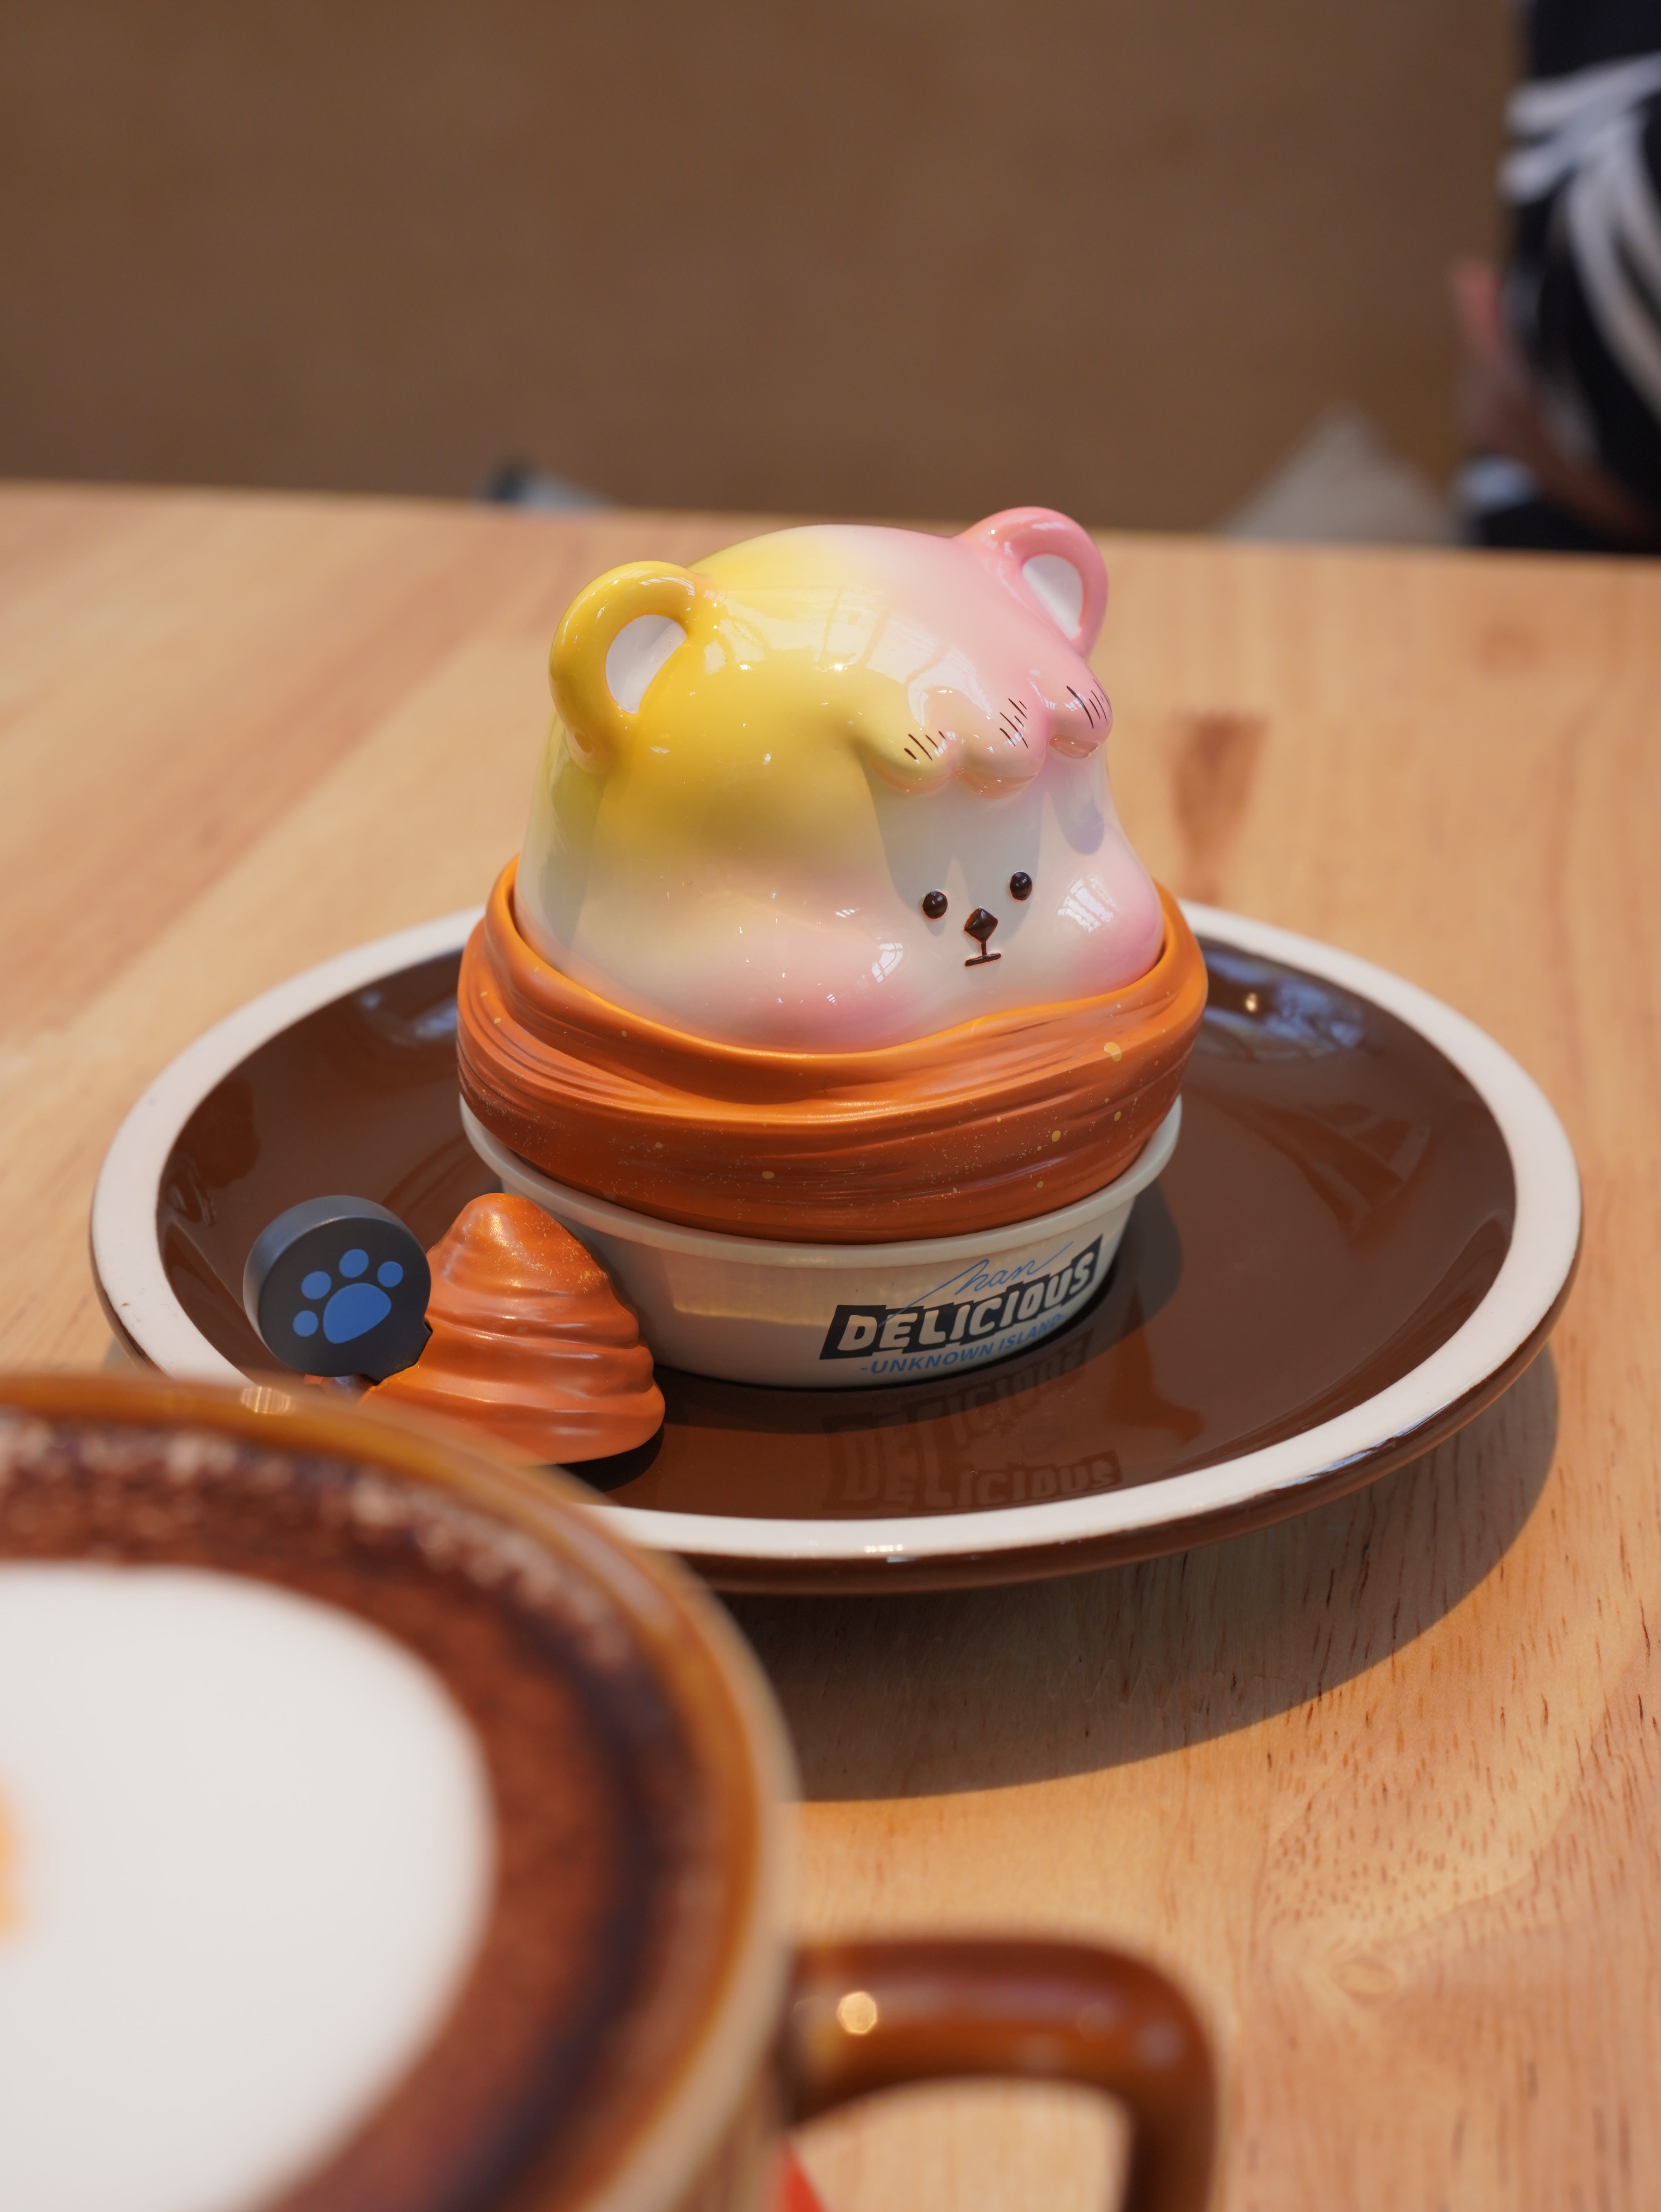 Croissant Han Han toy bear ice cream container and cup on plate, resin material.